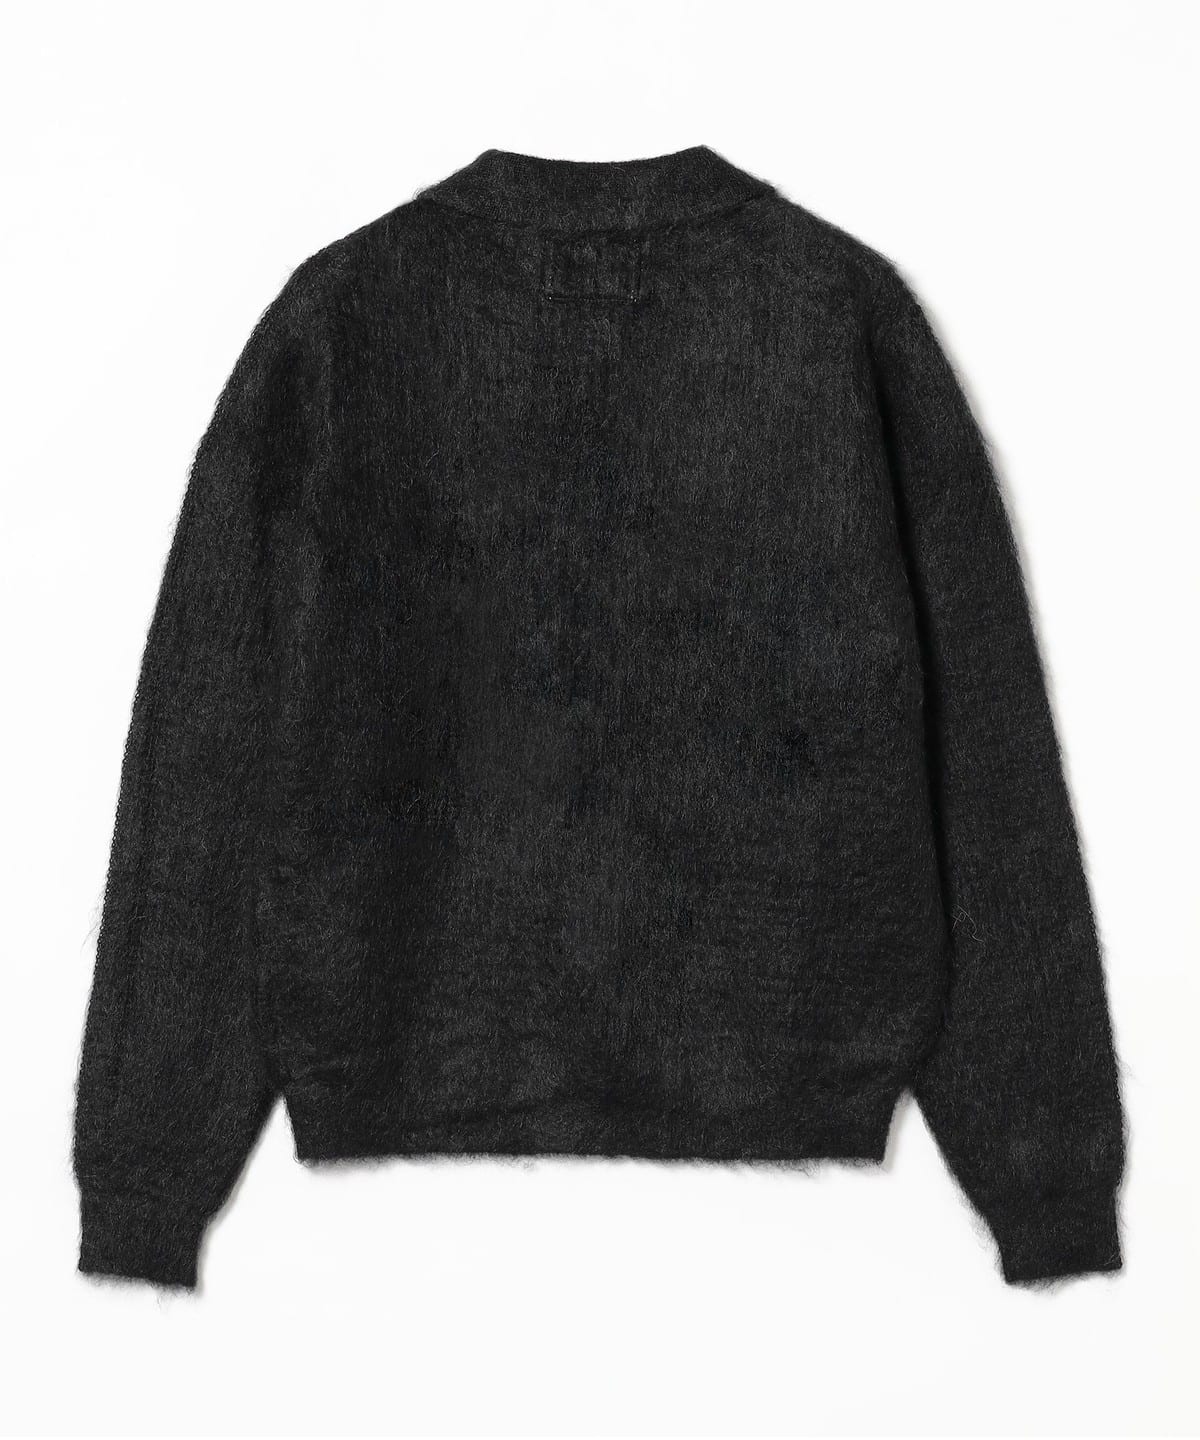 BEAMS FUTURE ARCHIVE / KNIT POLO (tops cardigan) mail order 